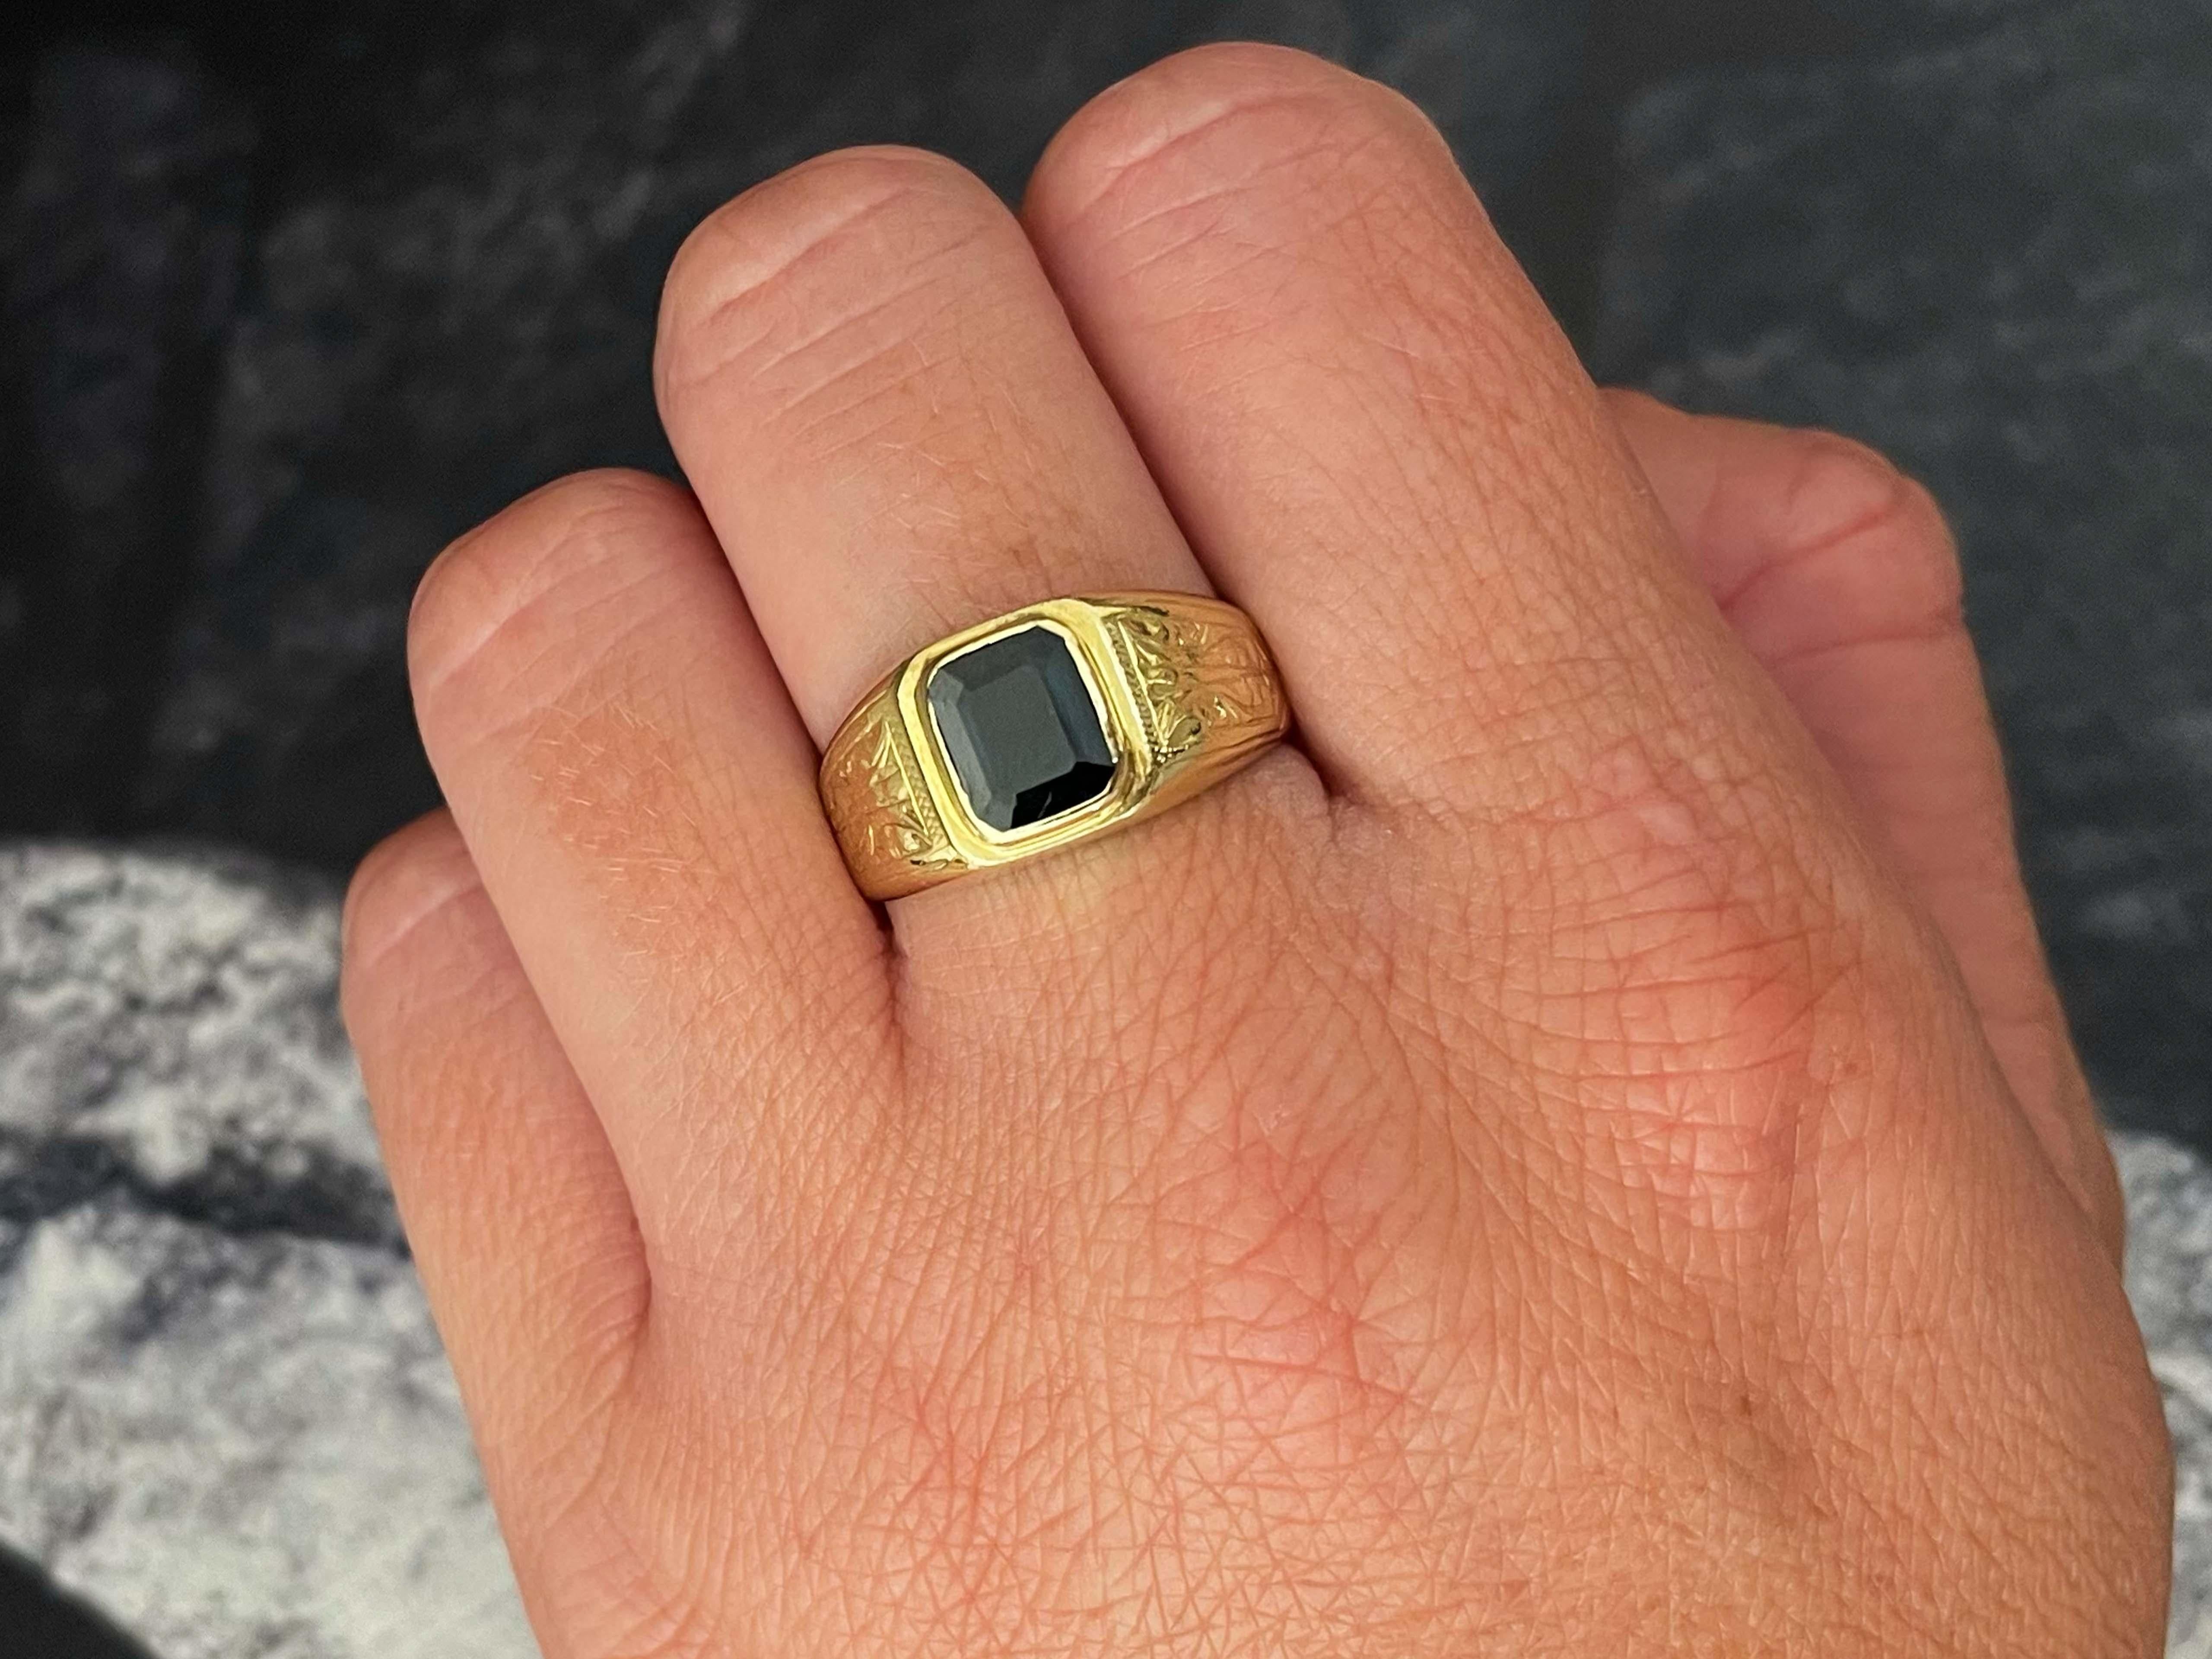 Item Specifications:

Metal: 18K Yellow Gold

Style: Statement Ring

Ring Size: 9 (resizing available for a fee)

Total Weight: 7.7 Grams

Gemstone Specifications:

Gemstone: 1 blue sapphire

Gemstone Measurements: 7.5 x 6.2 x 2.6
​
​Gemstone Carat